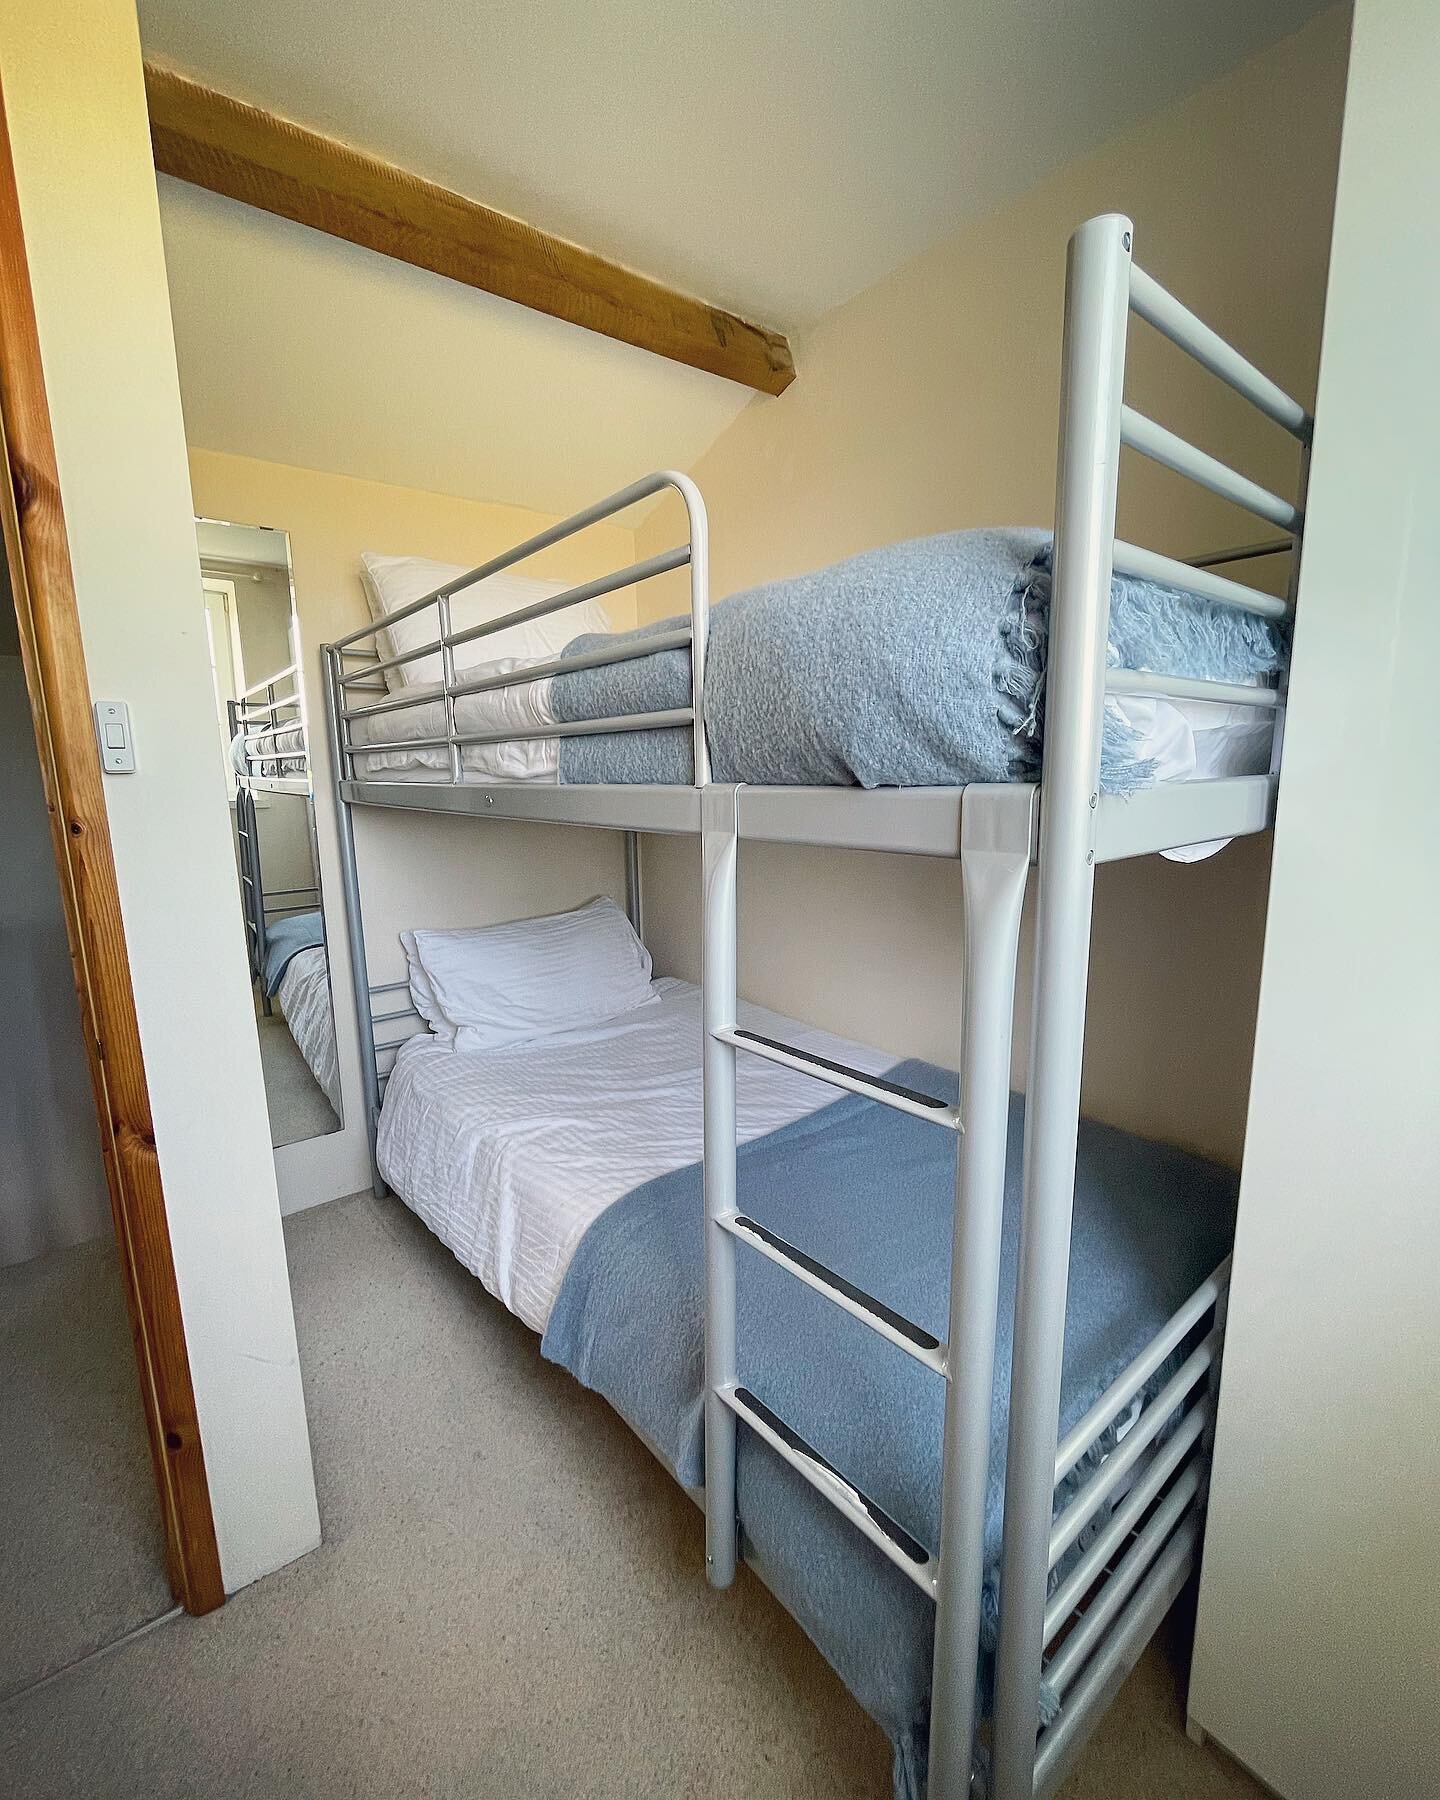 .
The Stable, one of our self catered cottages, has a room with bunk beds perfect for both kids and adults alike. Family holidays just got a whole lot more fun at Littlewell Farm!